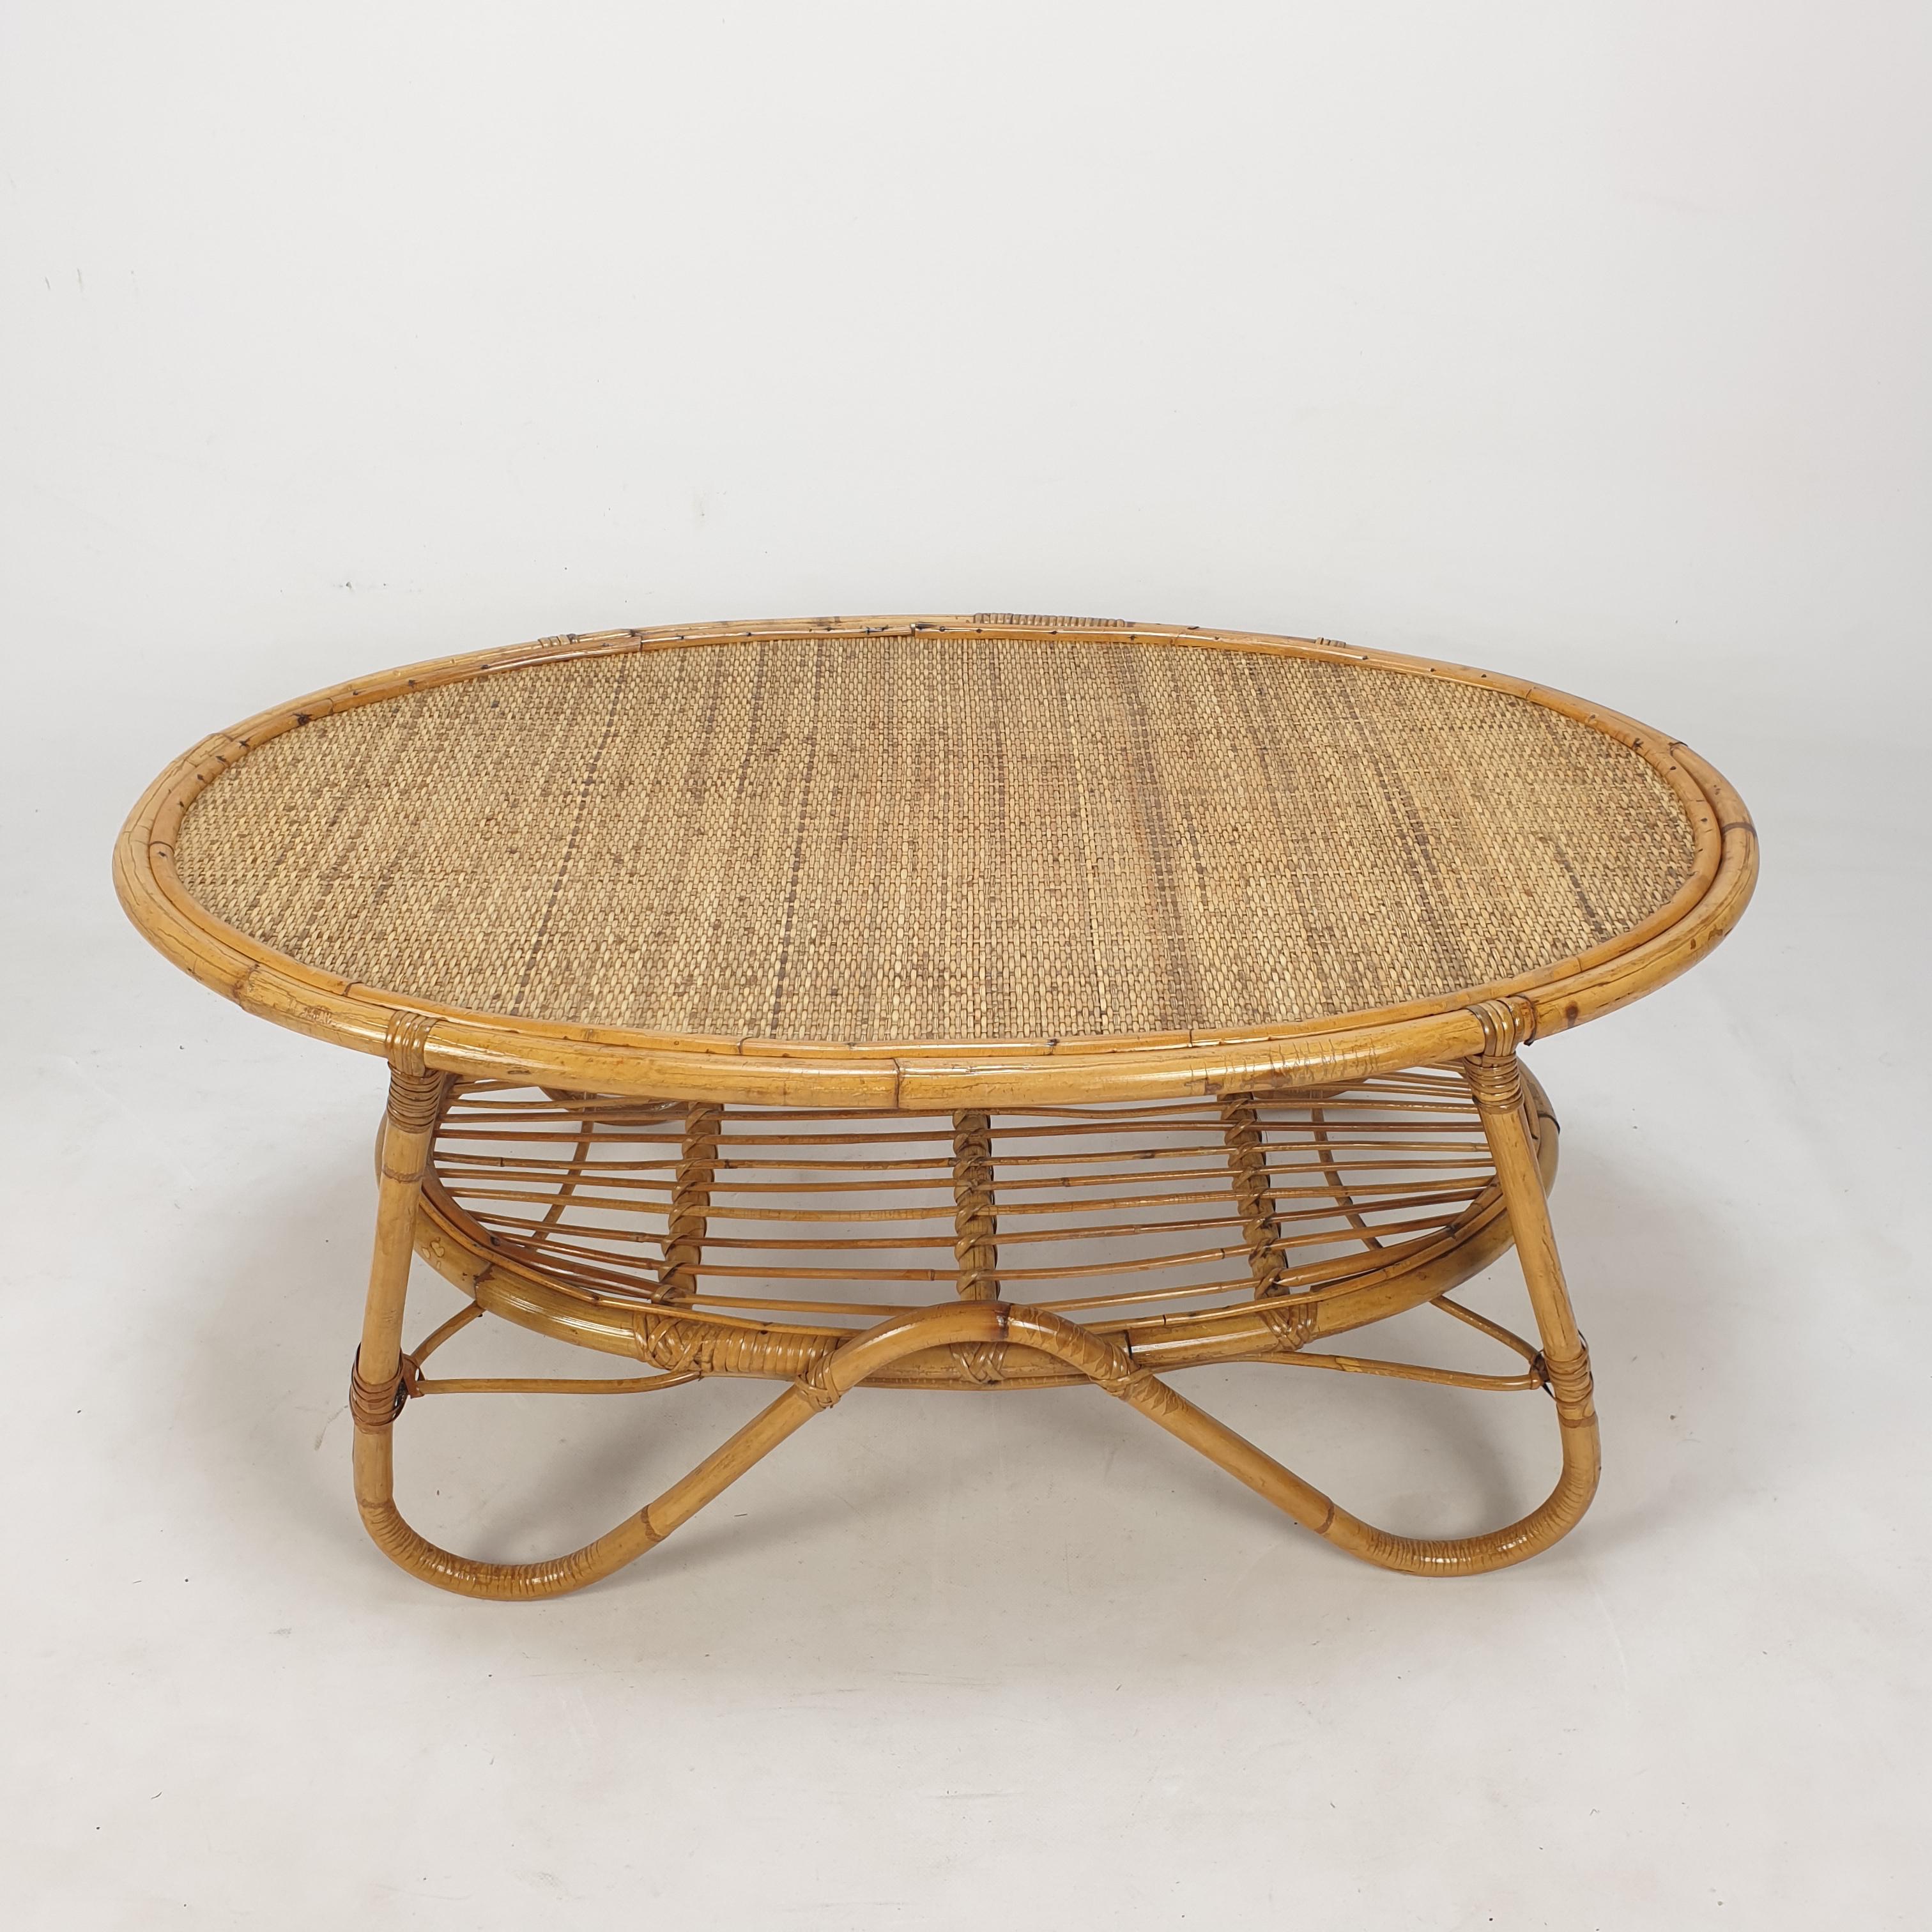 Hand-Crafted Italian Wicker and Rattan Coffee Table, 1960s For Sale